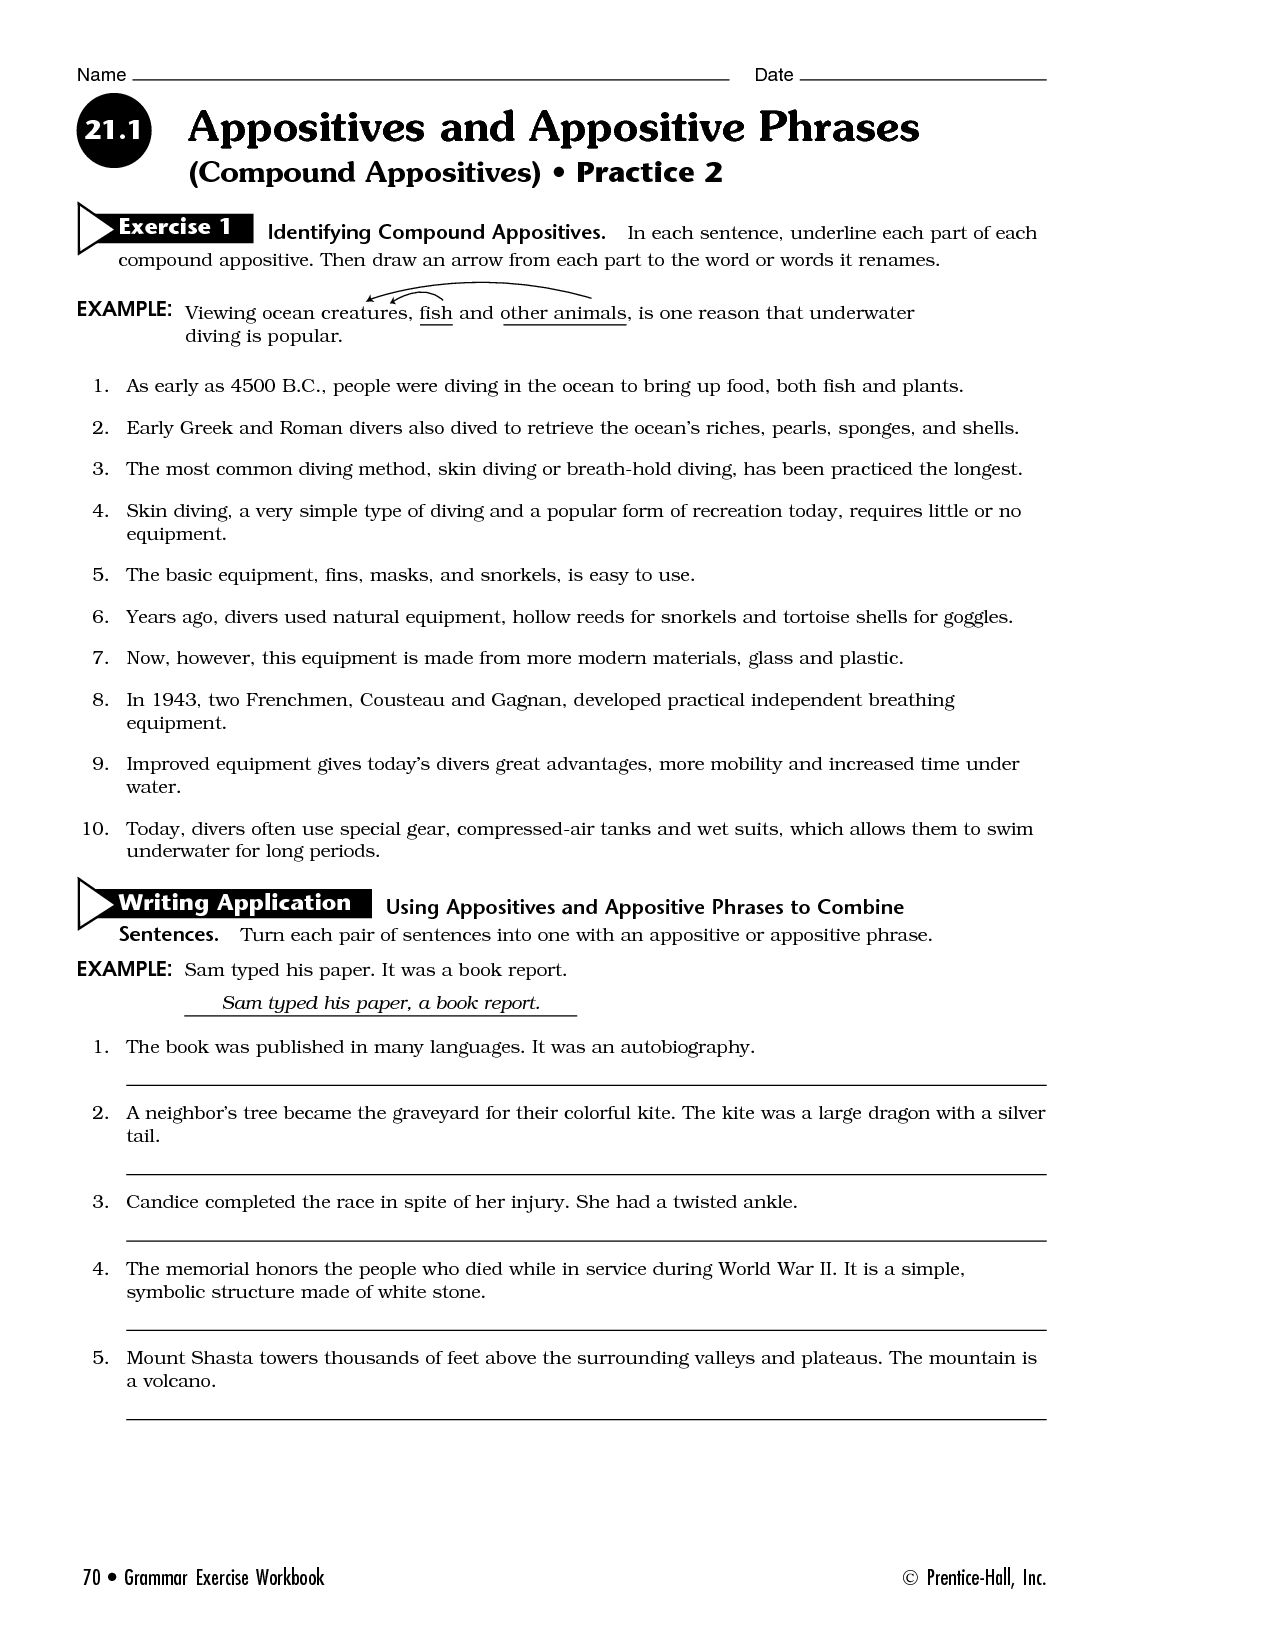 20 Best Images of Identifying Appositives Worksheets  Appositive Phrase Sentence Examples 